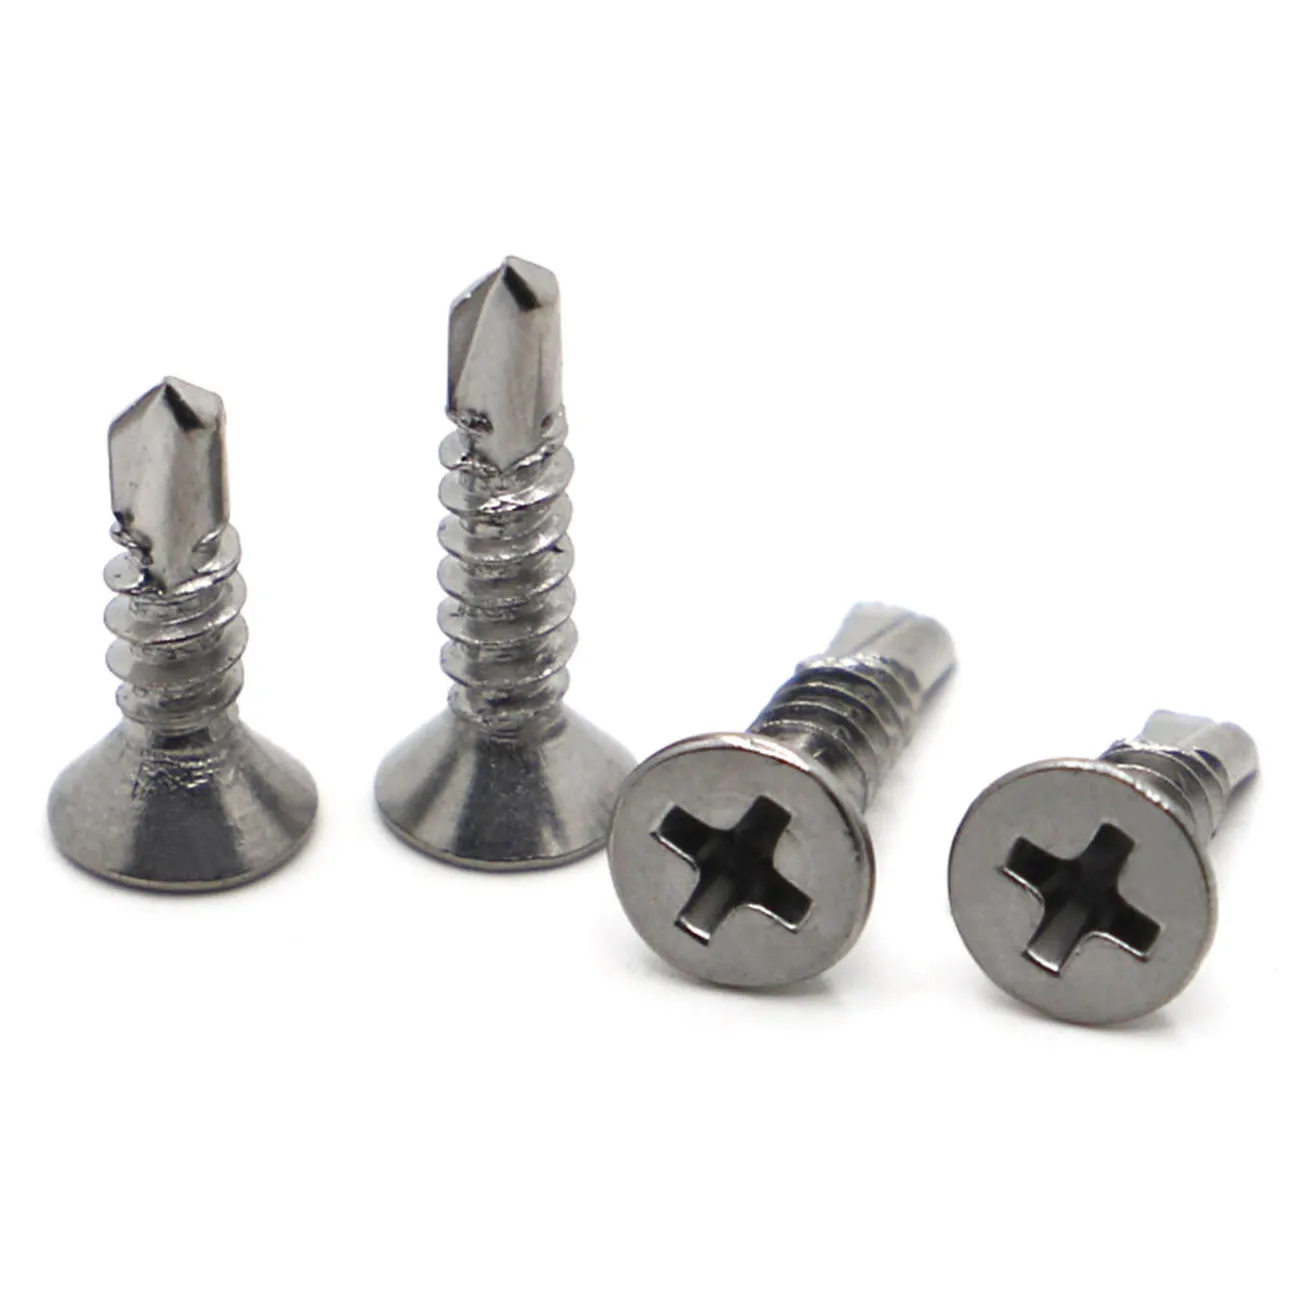 

M3.5 M4.2 M4.8 M5.5 M6.3 410 Stainless Steel Cross Phillips Flat Head Self-drilling Screw Self-tapping Dovetail Screw